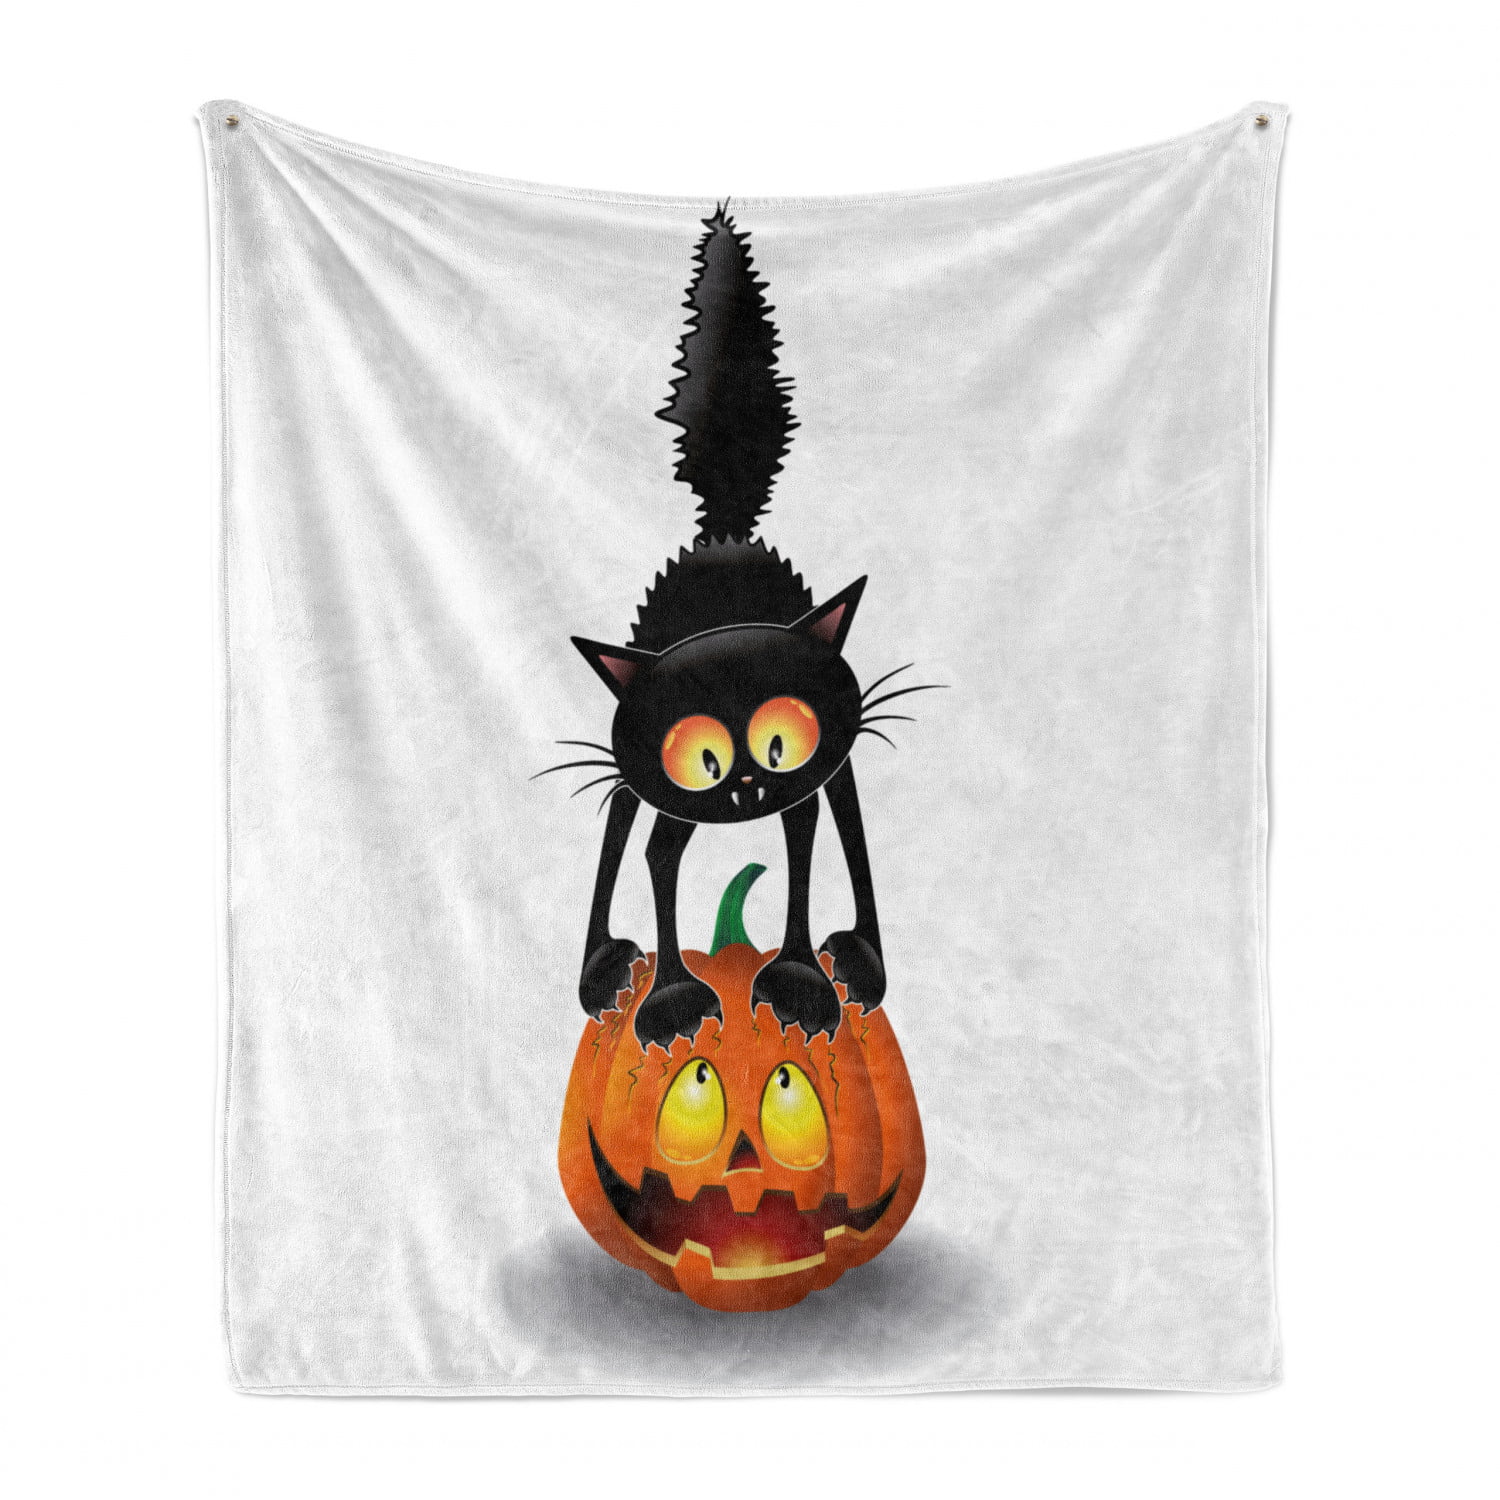 Christmas Pumpkins Blanket 50x60 Cartoon Cool Flannel Throws Pumpkins Blankets for Couch Sofa All Season Super Cozy Plush Blanket for Kids Adults 